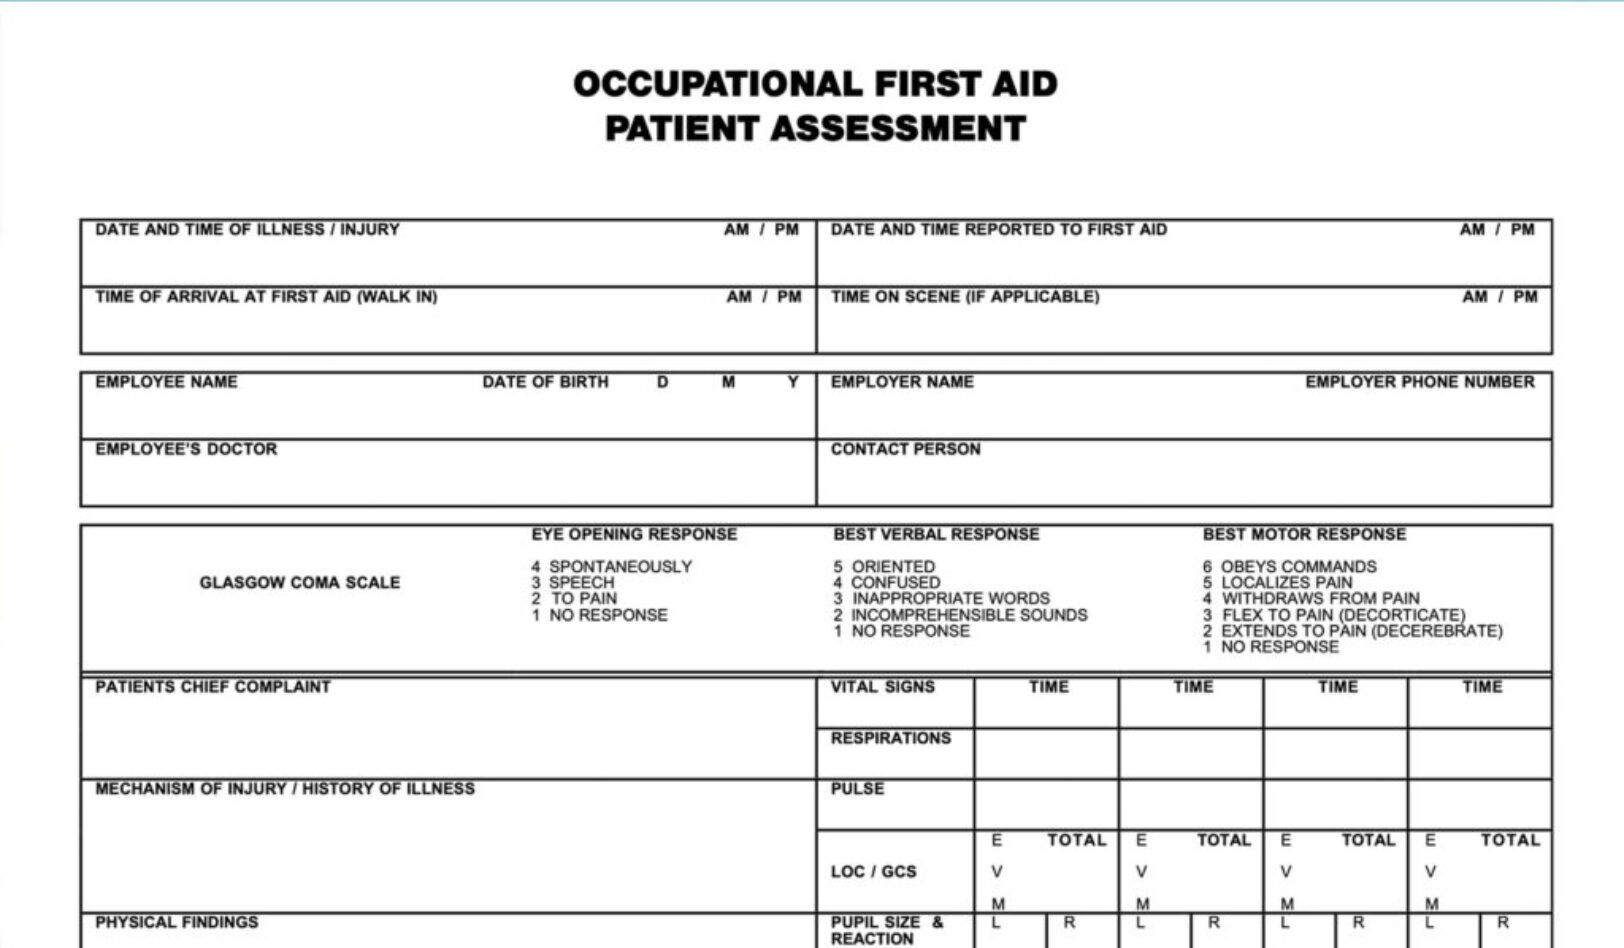 First Aid Patient Assessment (WorkSafeBC Form 55M60)